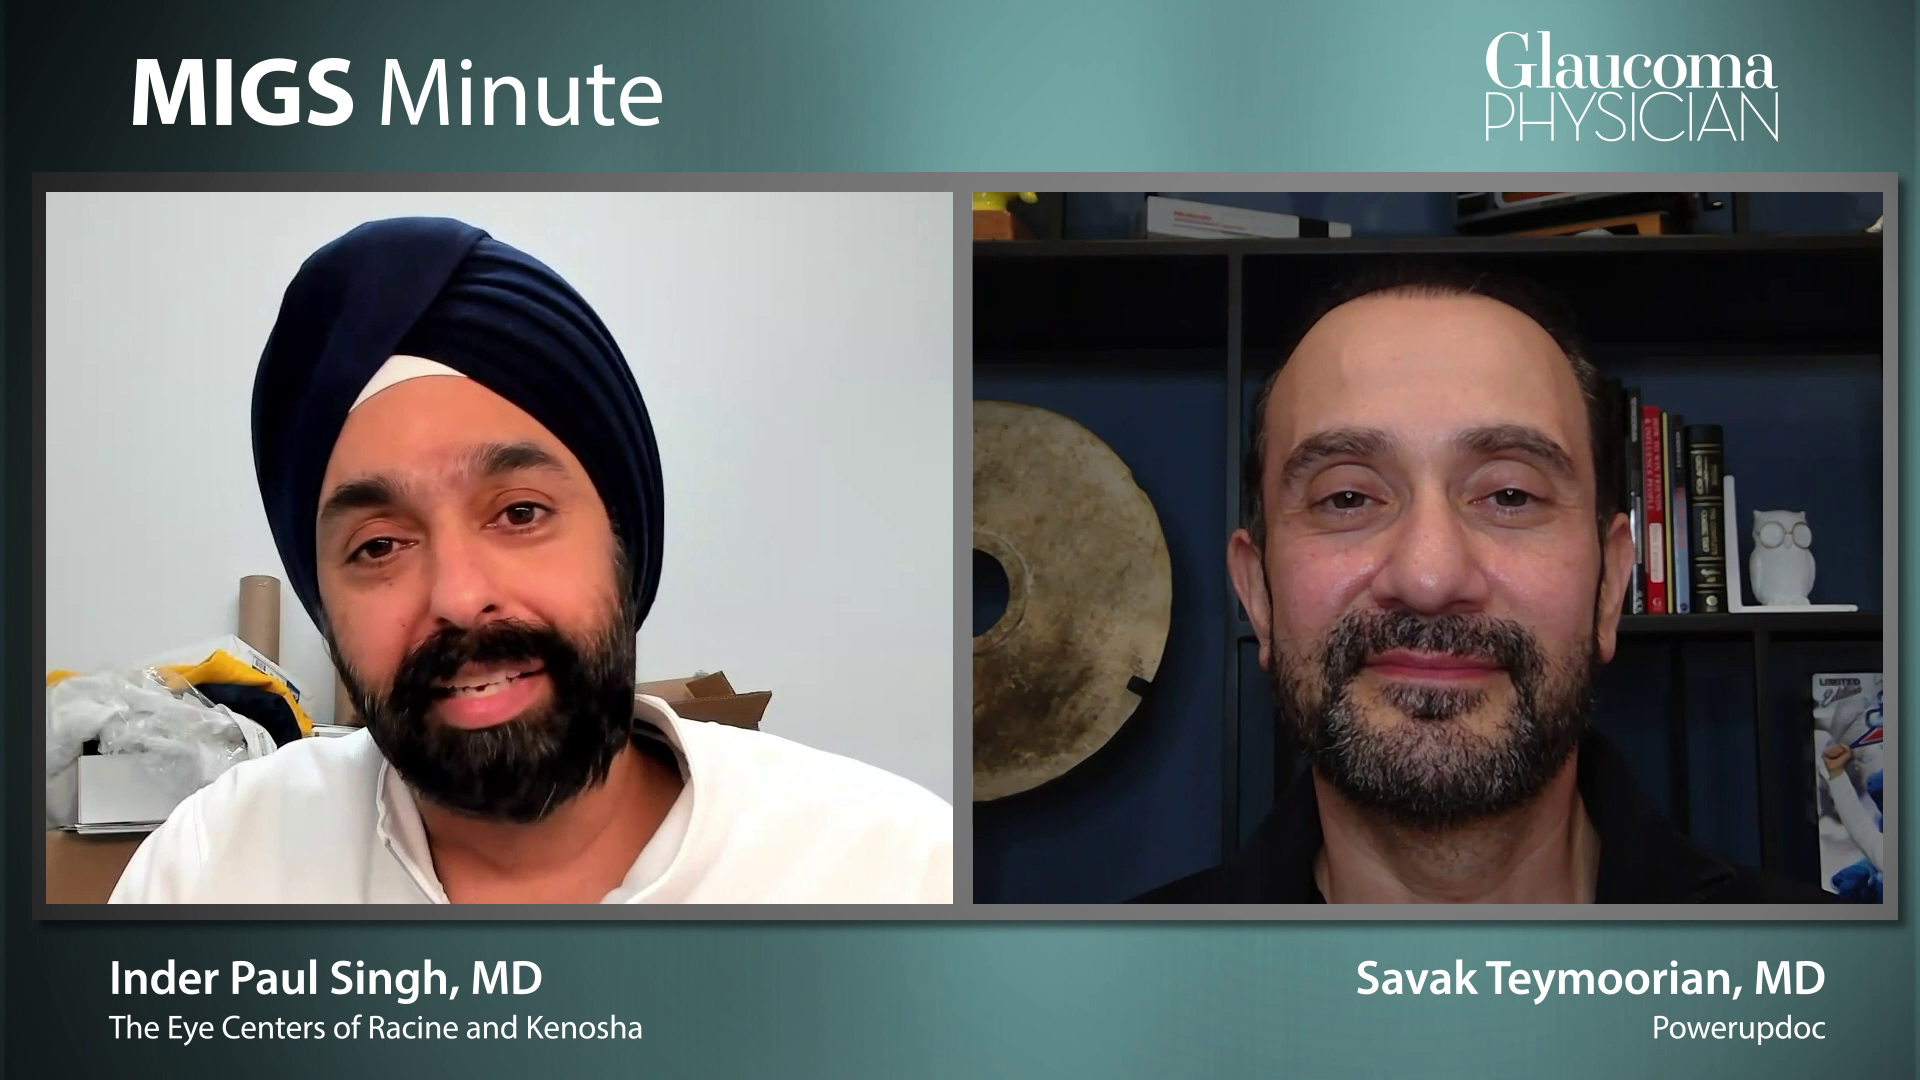 Episode 14: Inder Paul Singh, MD, and Savak Teymoorian, MD, discuss interventional treatment conversations with patients.